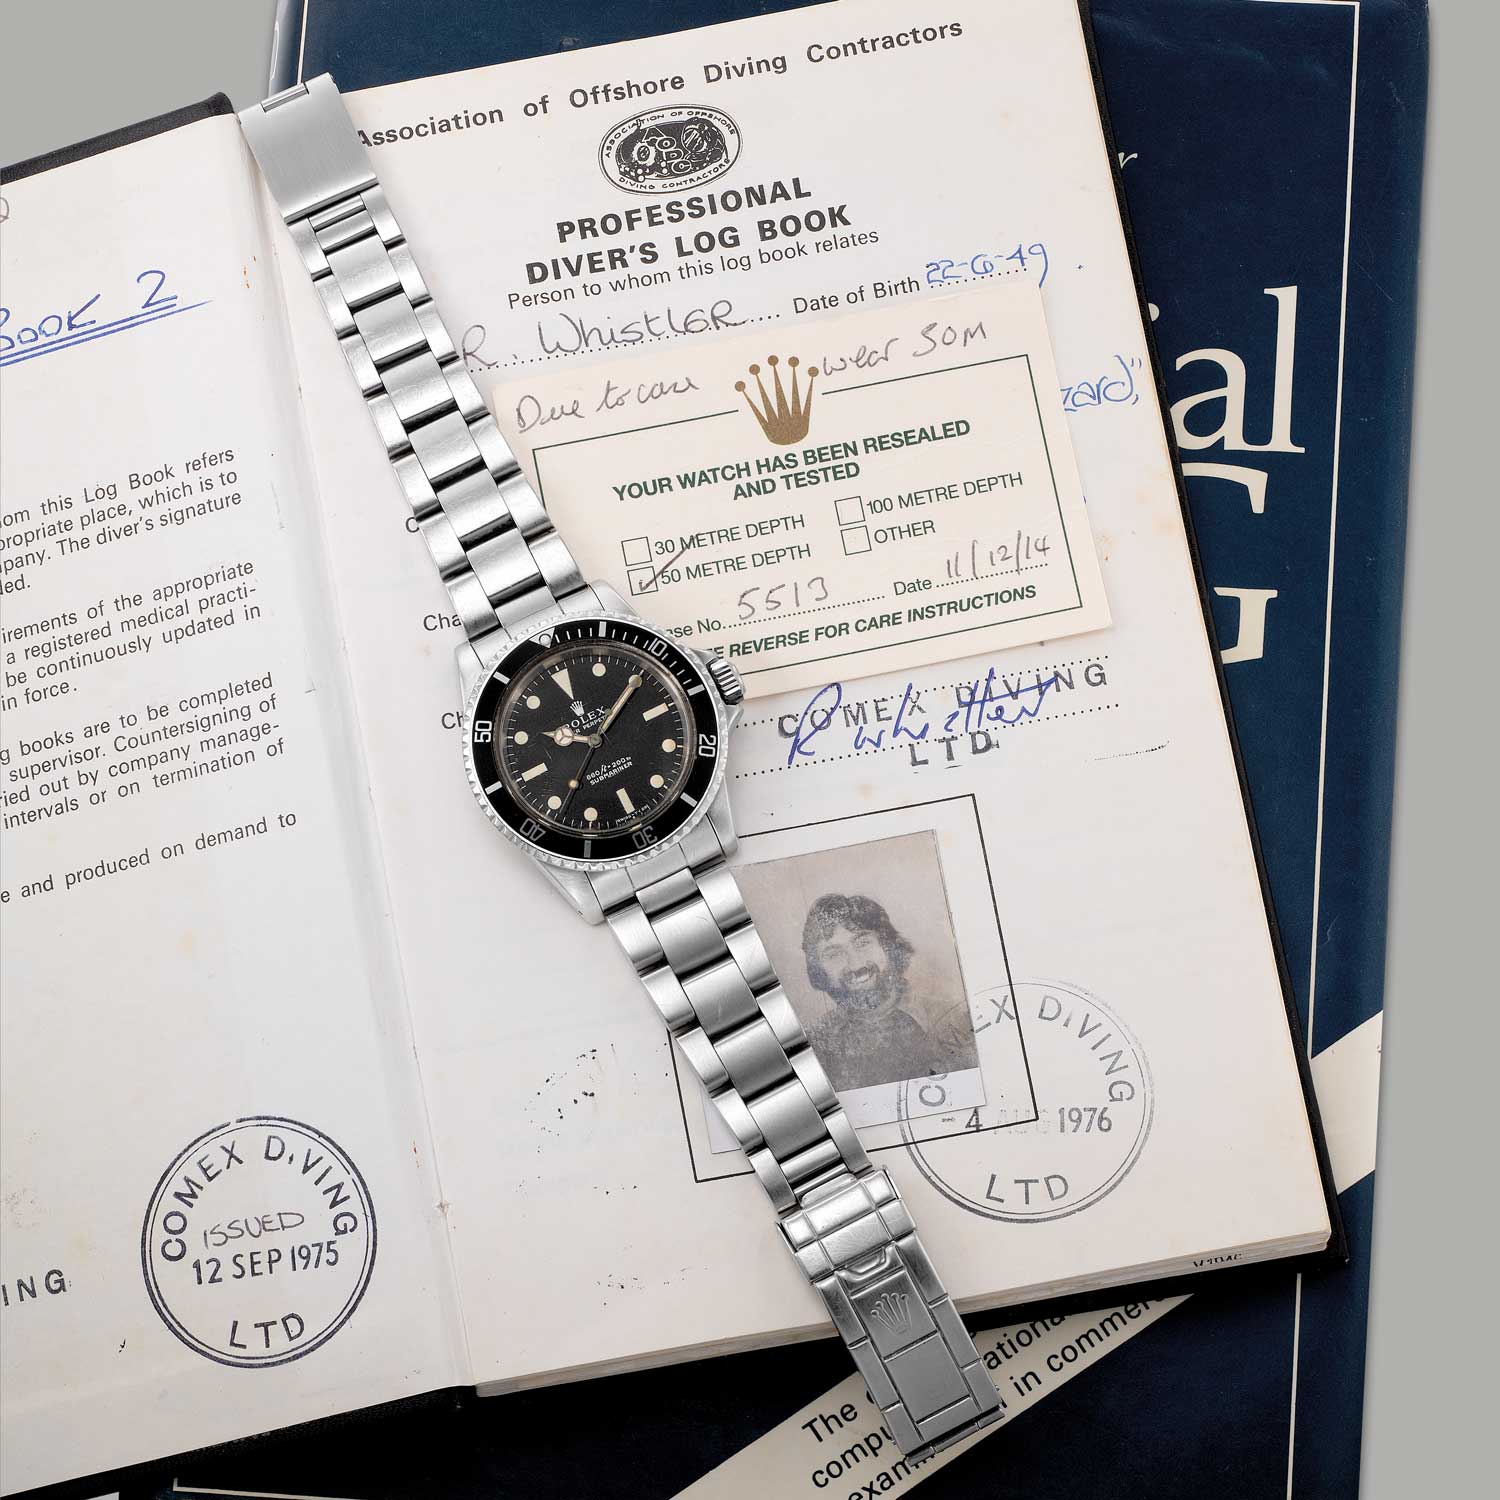 Diving Rex - An Original Owner of the Rolex Comex coming up for auction at Phillips Hong Kong Watch Sale XII